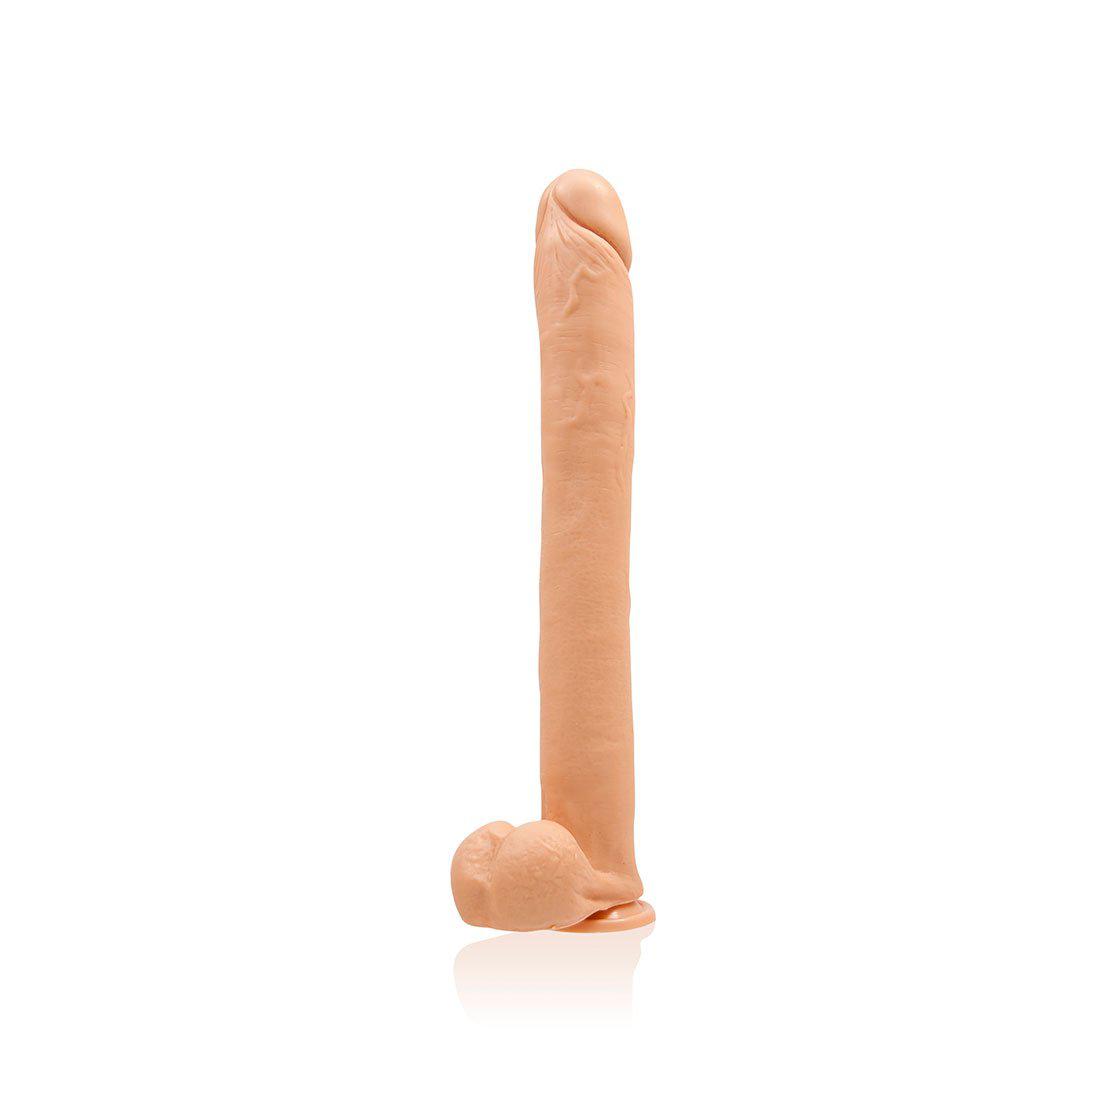 16 Inch Exxxtreme Dong W/suction - Flesh